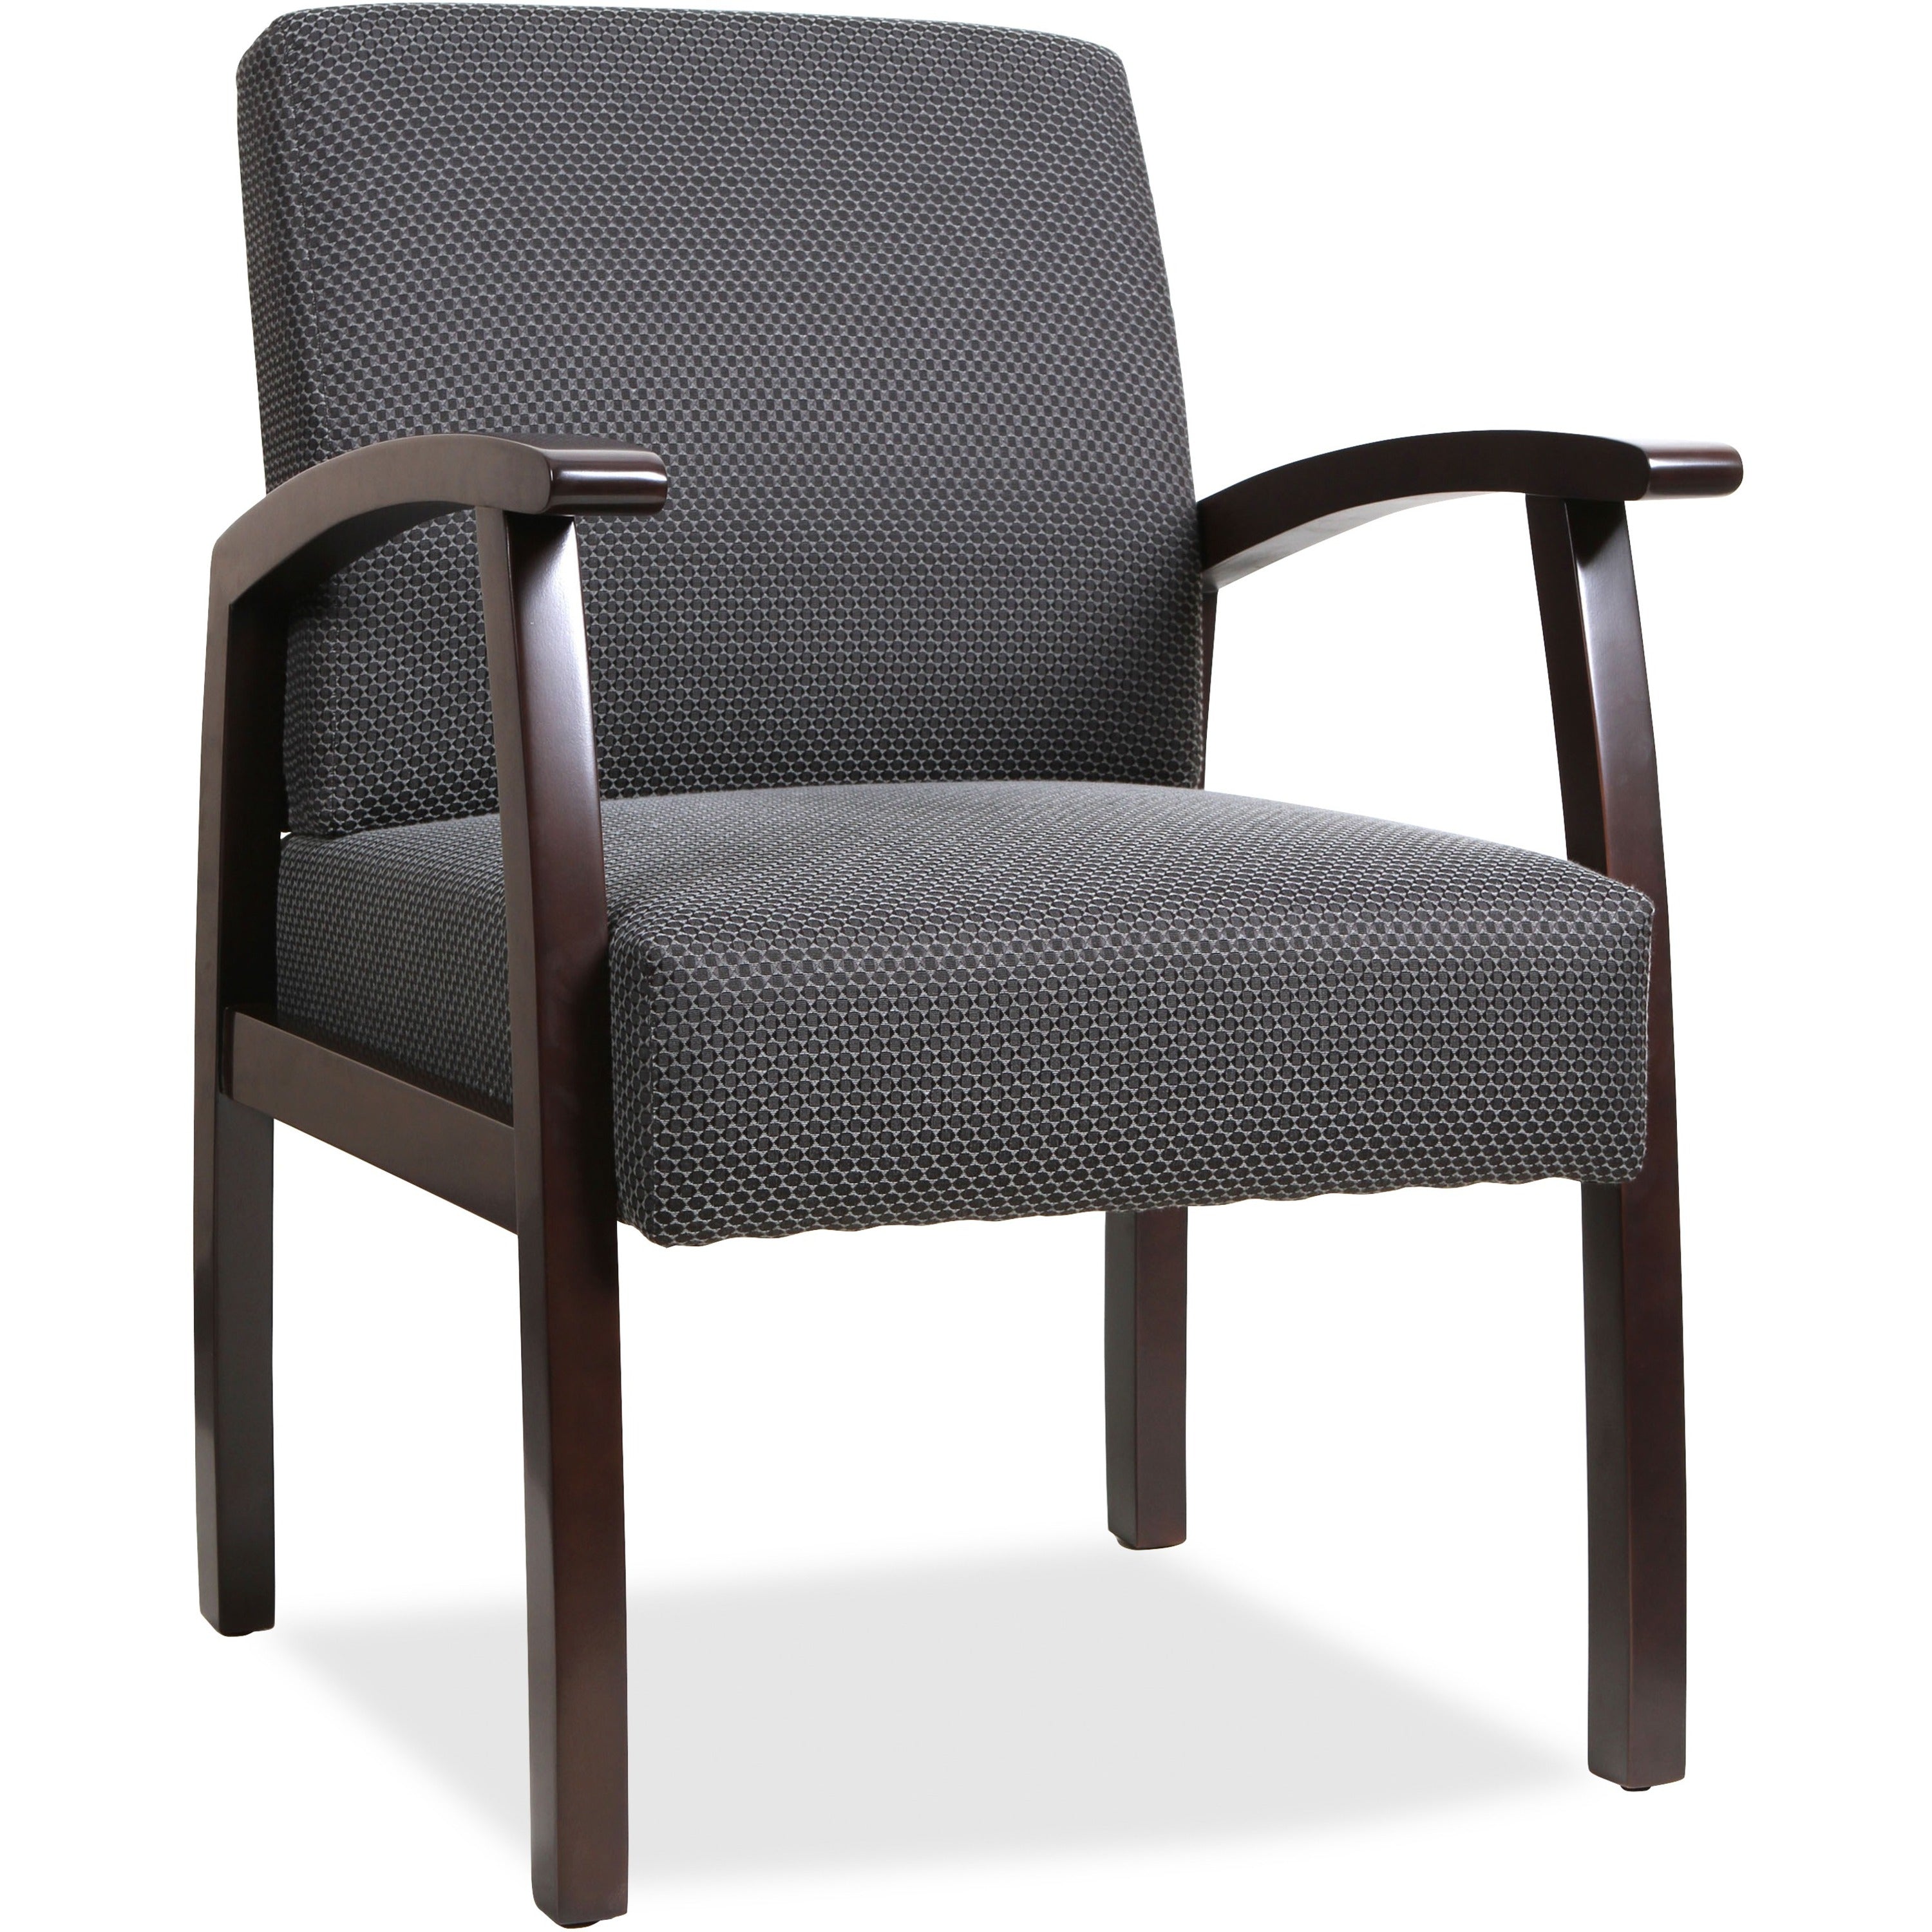 Lorell Thickly Padded Guest Chair - Espresso Frame - Four-legged Base - Charcoal - 1 Each - 